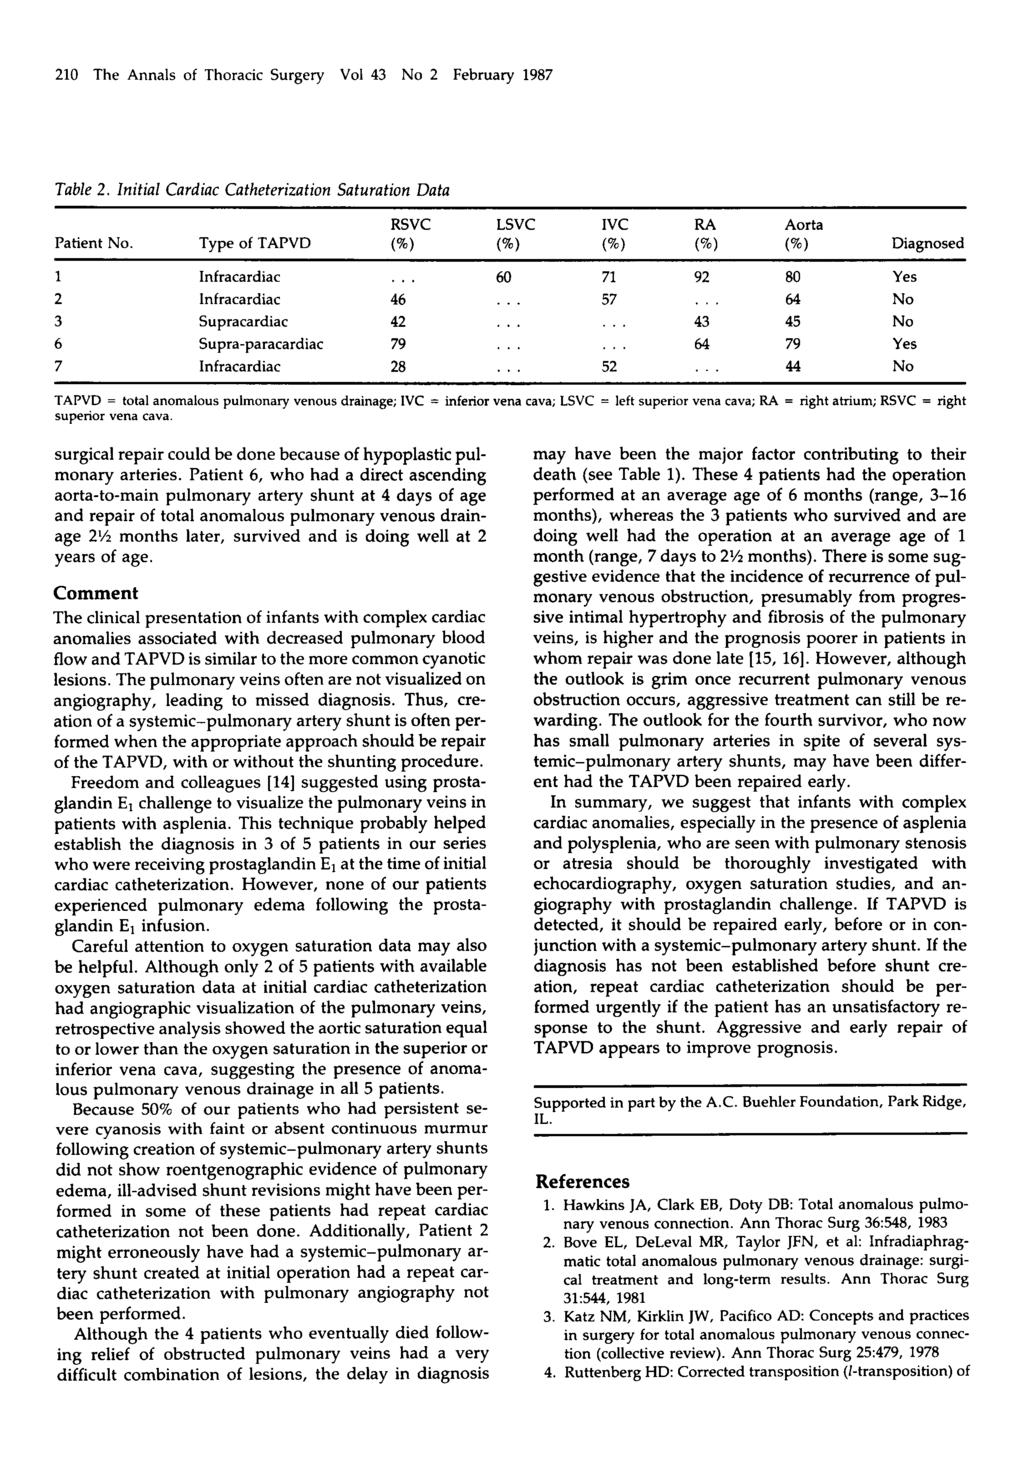 210 The Annals of Thoracic Surgery Vol 43 No 2 February 1987 Table 2. lnitial Cardiac Catheterization Saturation Data RSVC LSVC IVC RA Aorta Patient No. Type of TAPVD (%) (%) (%I (%) Diagnosed 1.